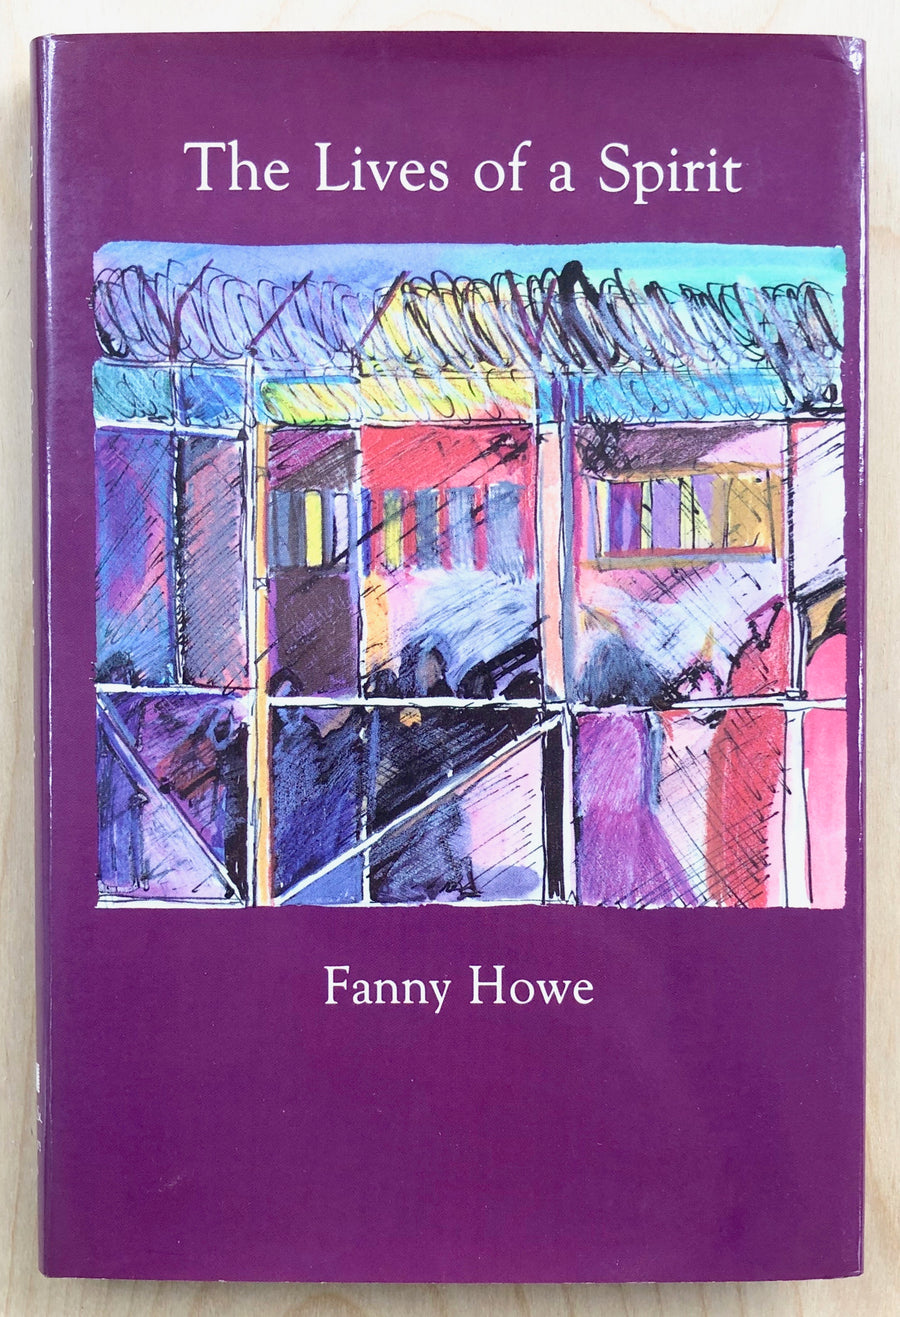 THE LIVES OF A SPIRIT by Fanny Howe (Inscribed by Howe to fellow poet David Giannini)